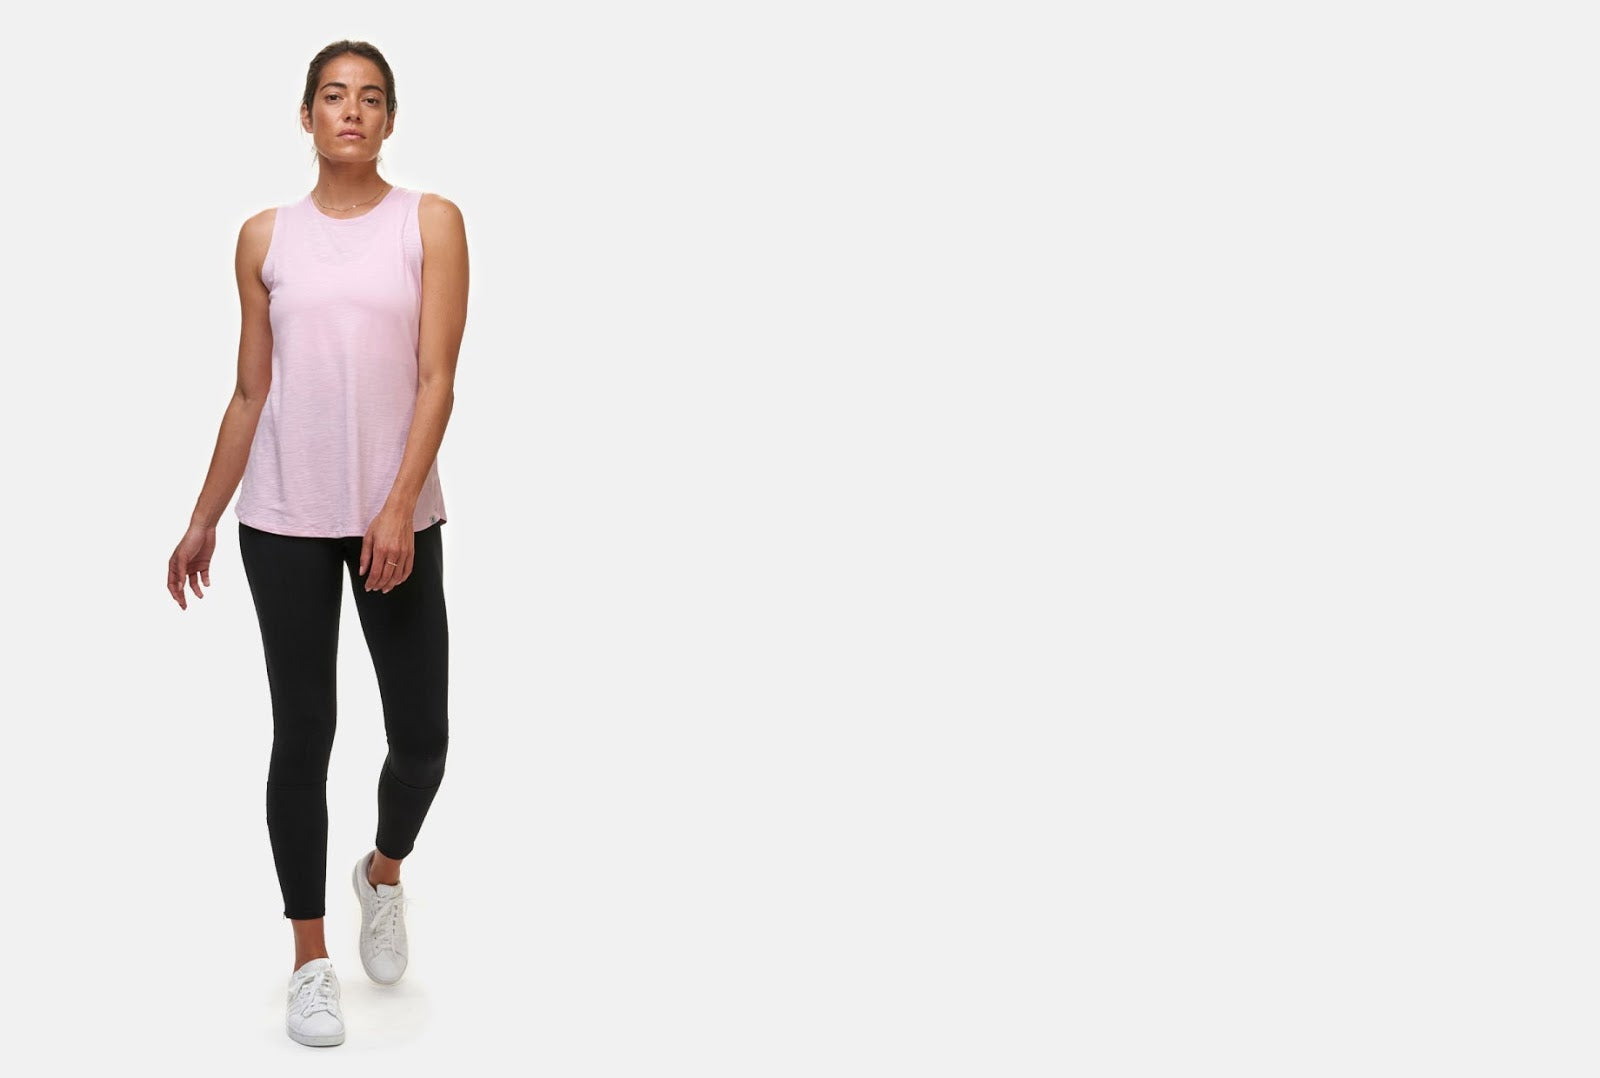 How to Choose the Best Yoga Tank Top